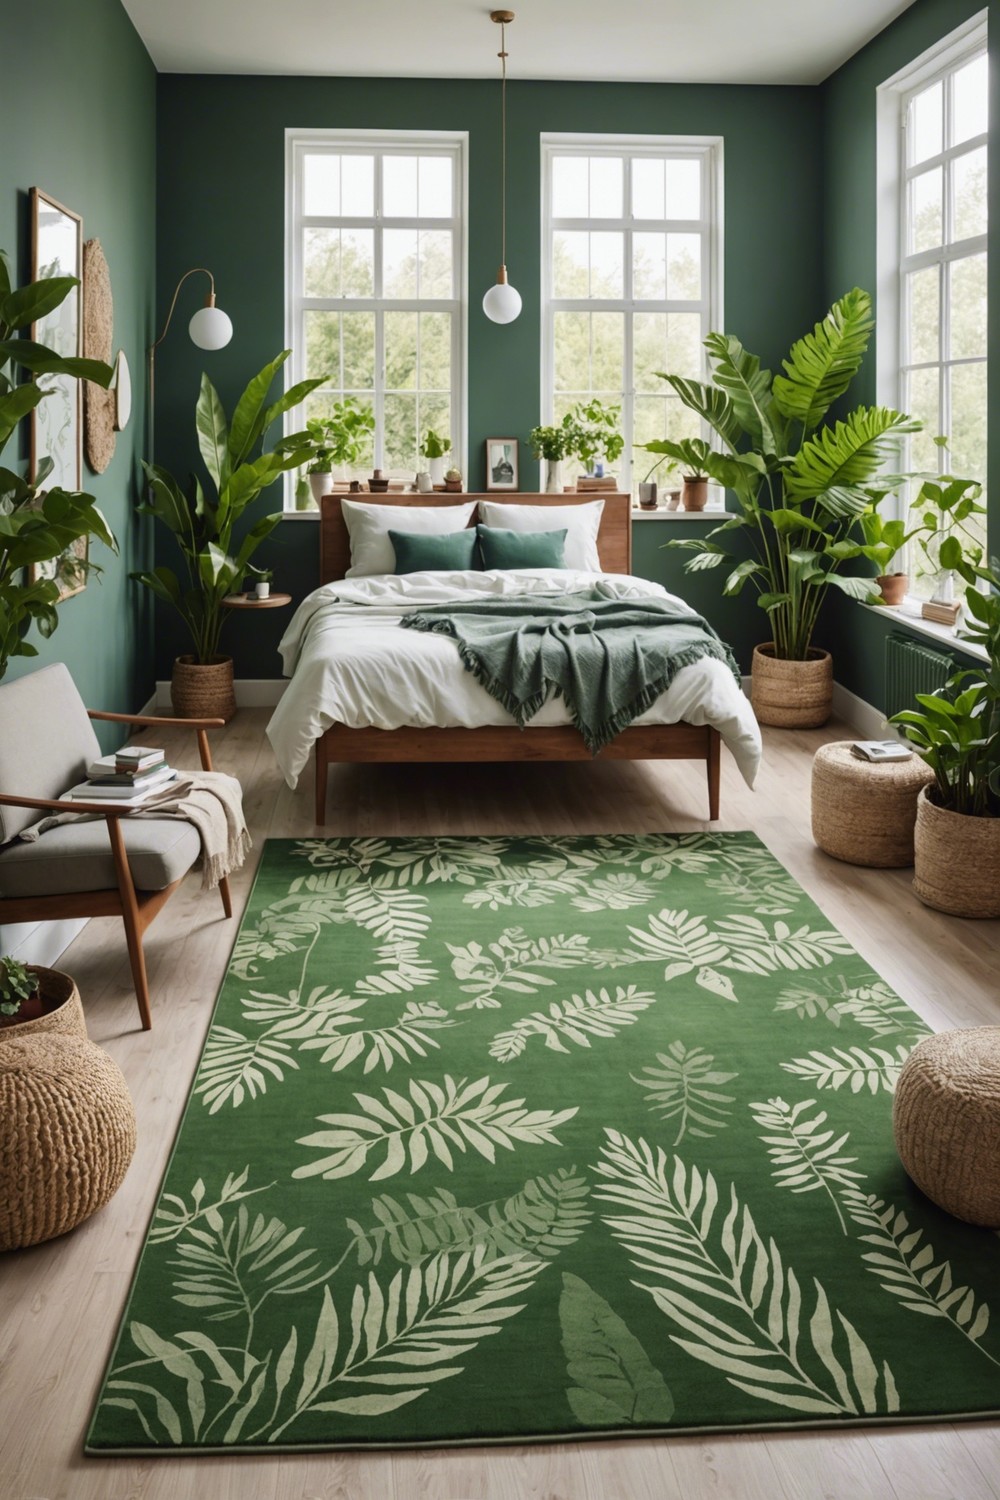 Bring in the Outdoors with a Nature-Inspired Rug